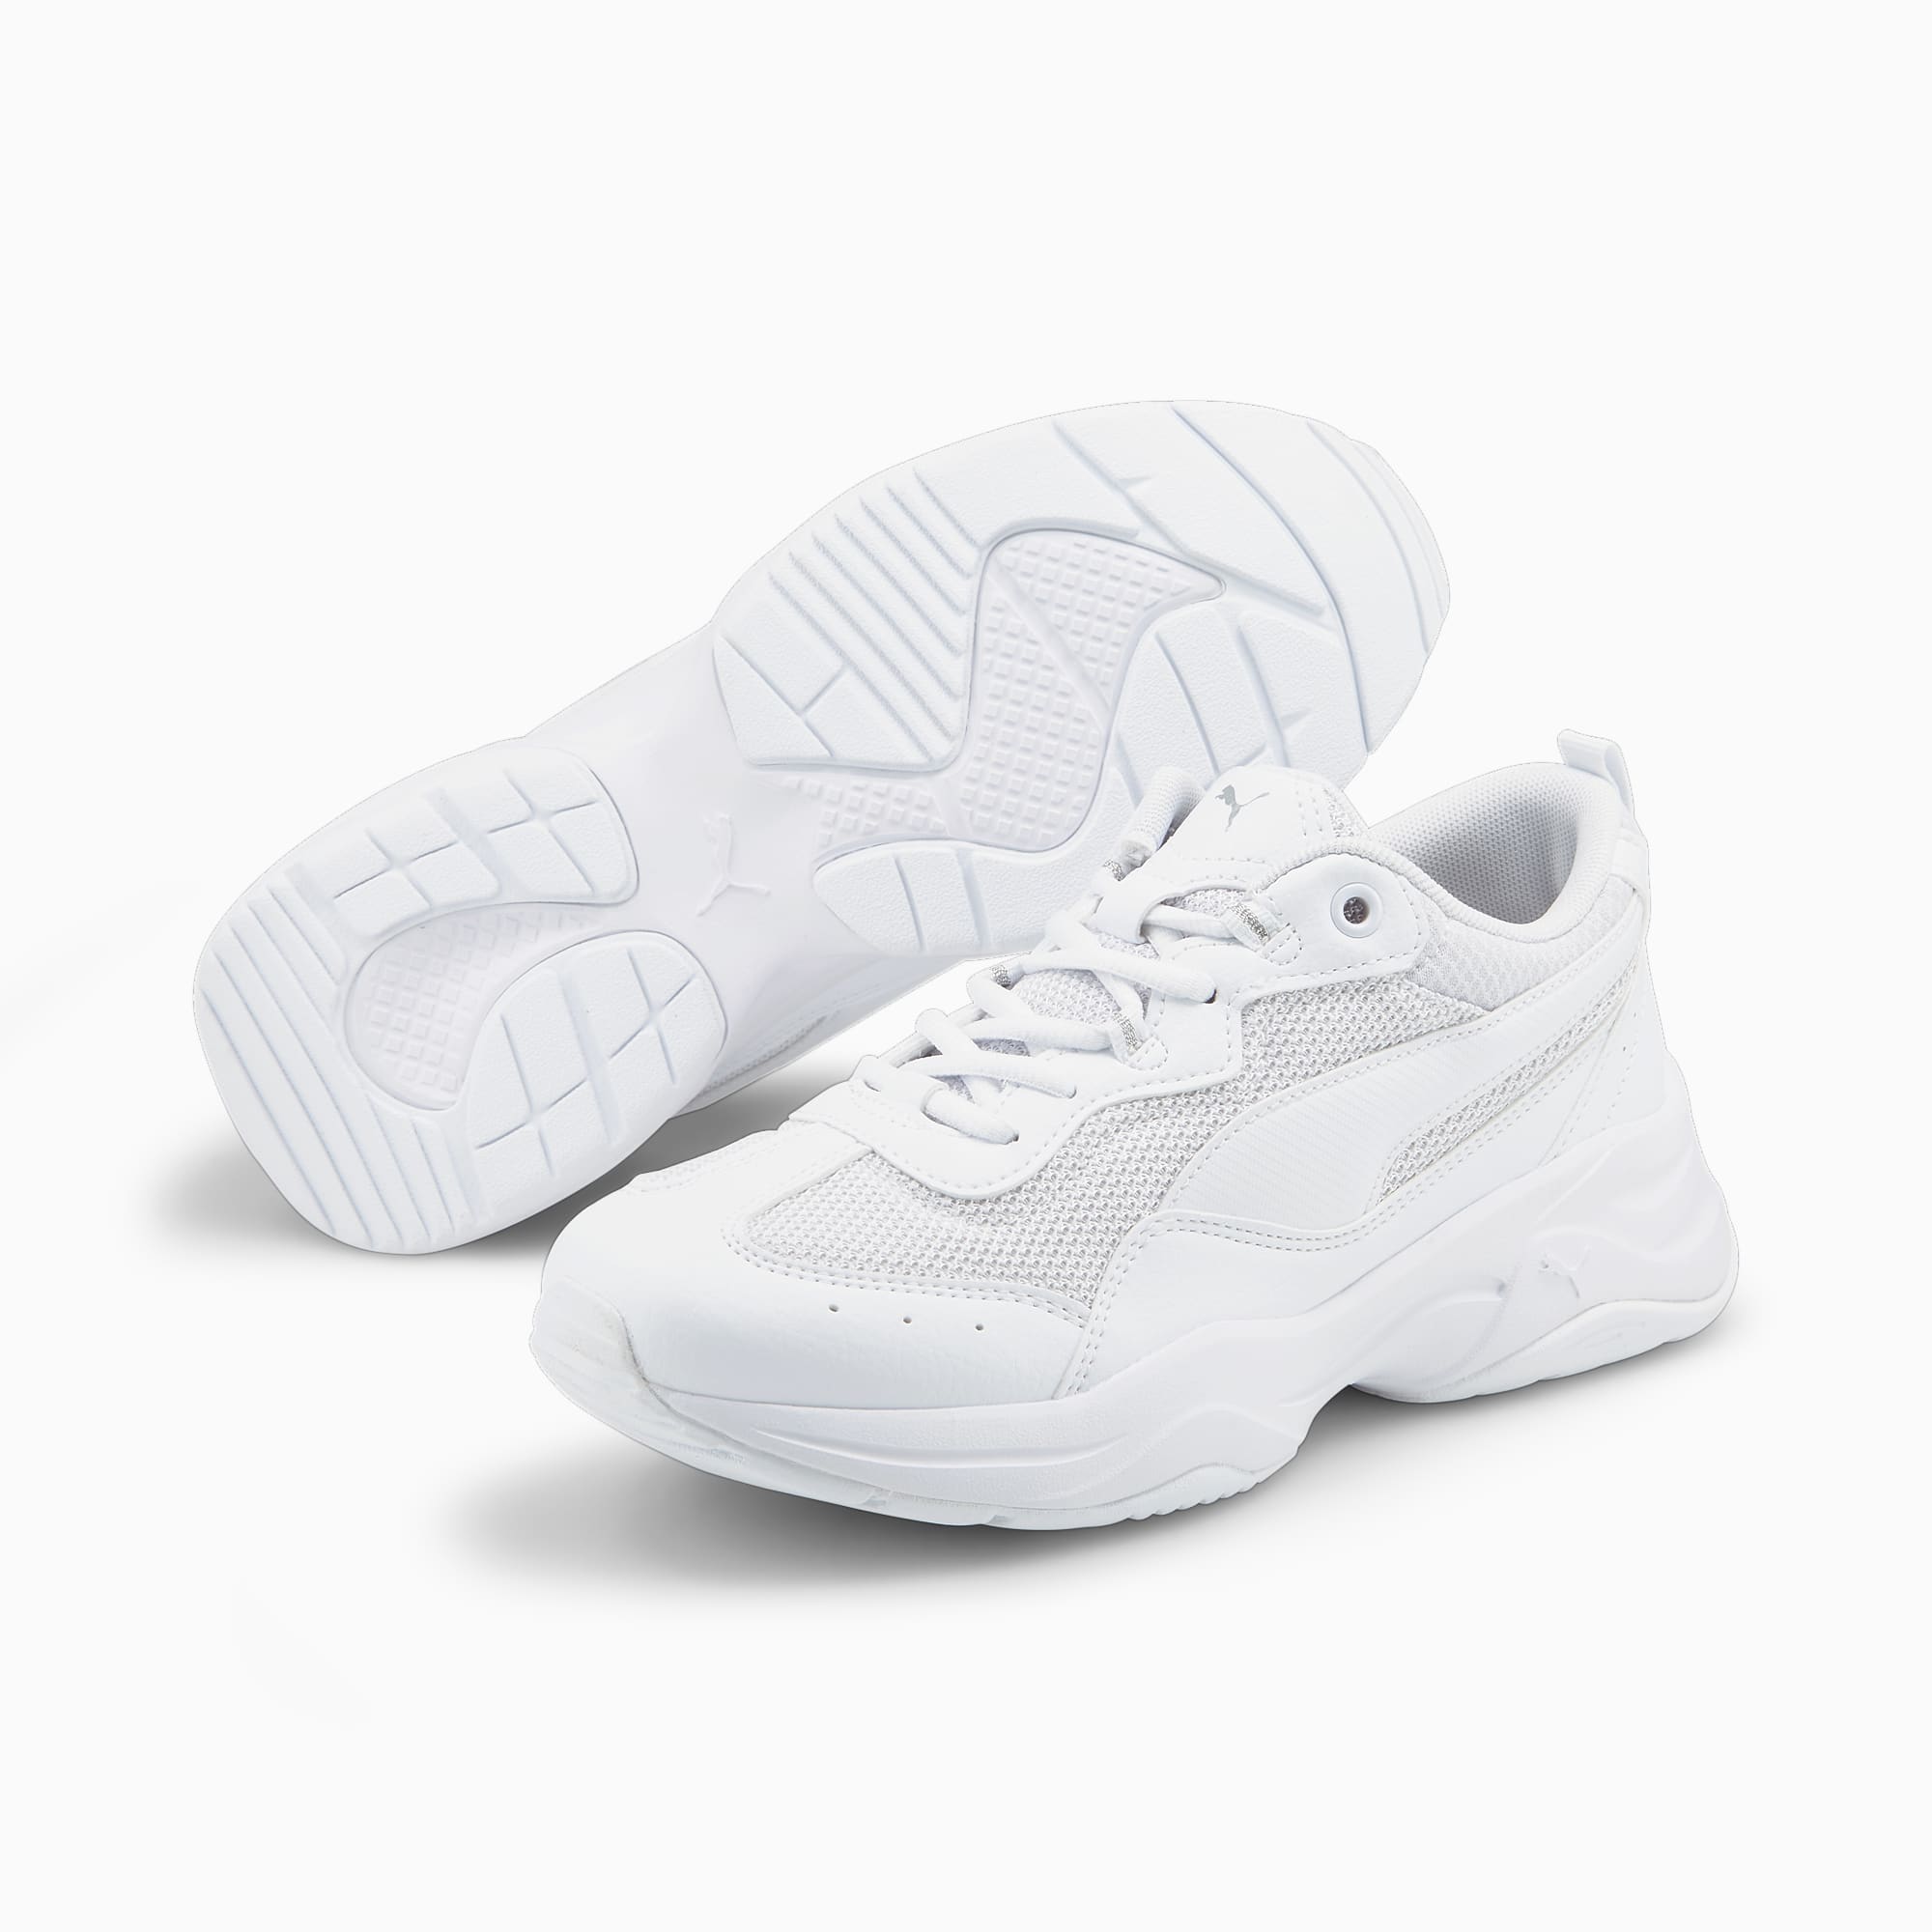 Trainers | White-Gray Violet-Silver 